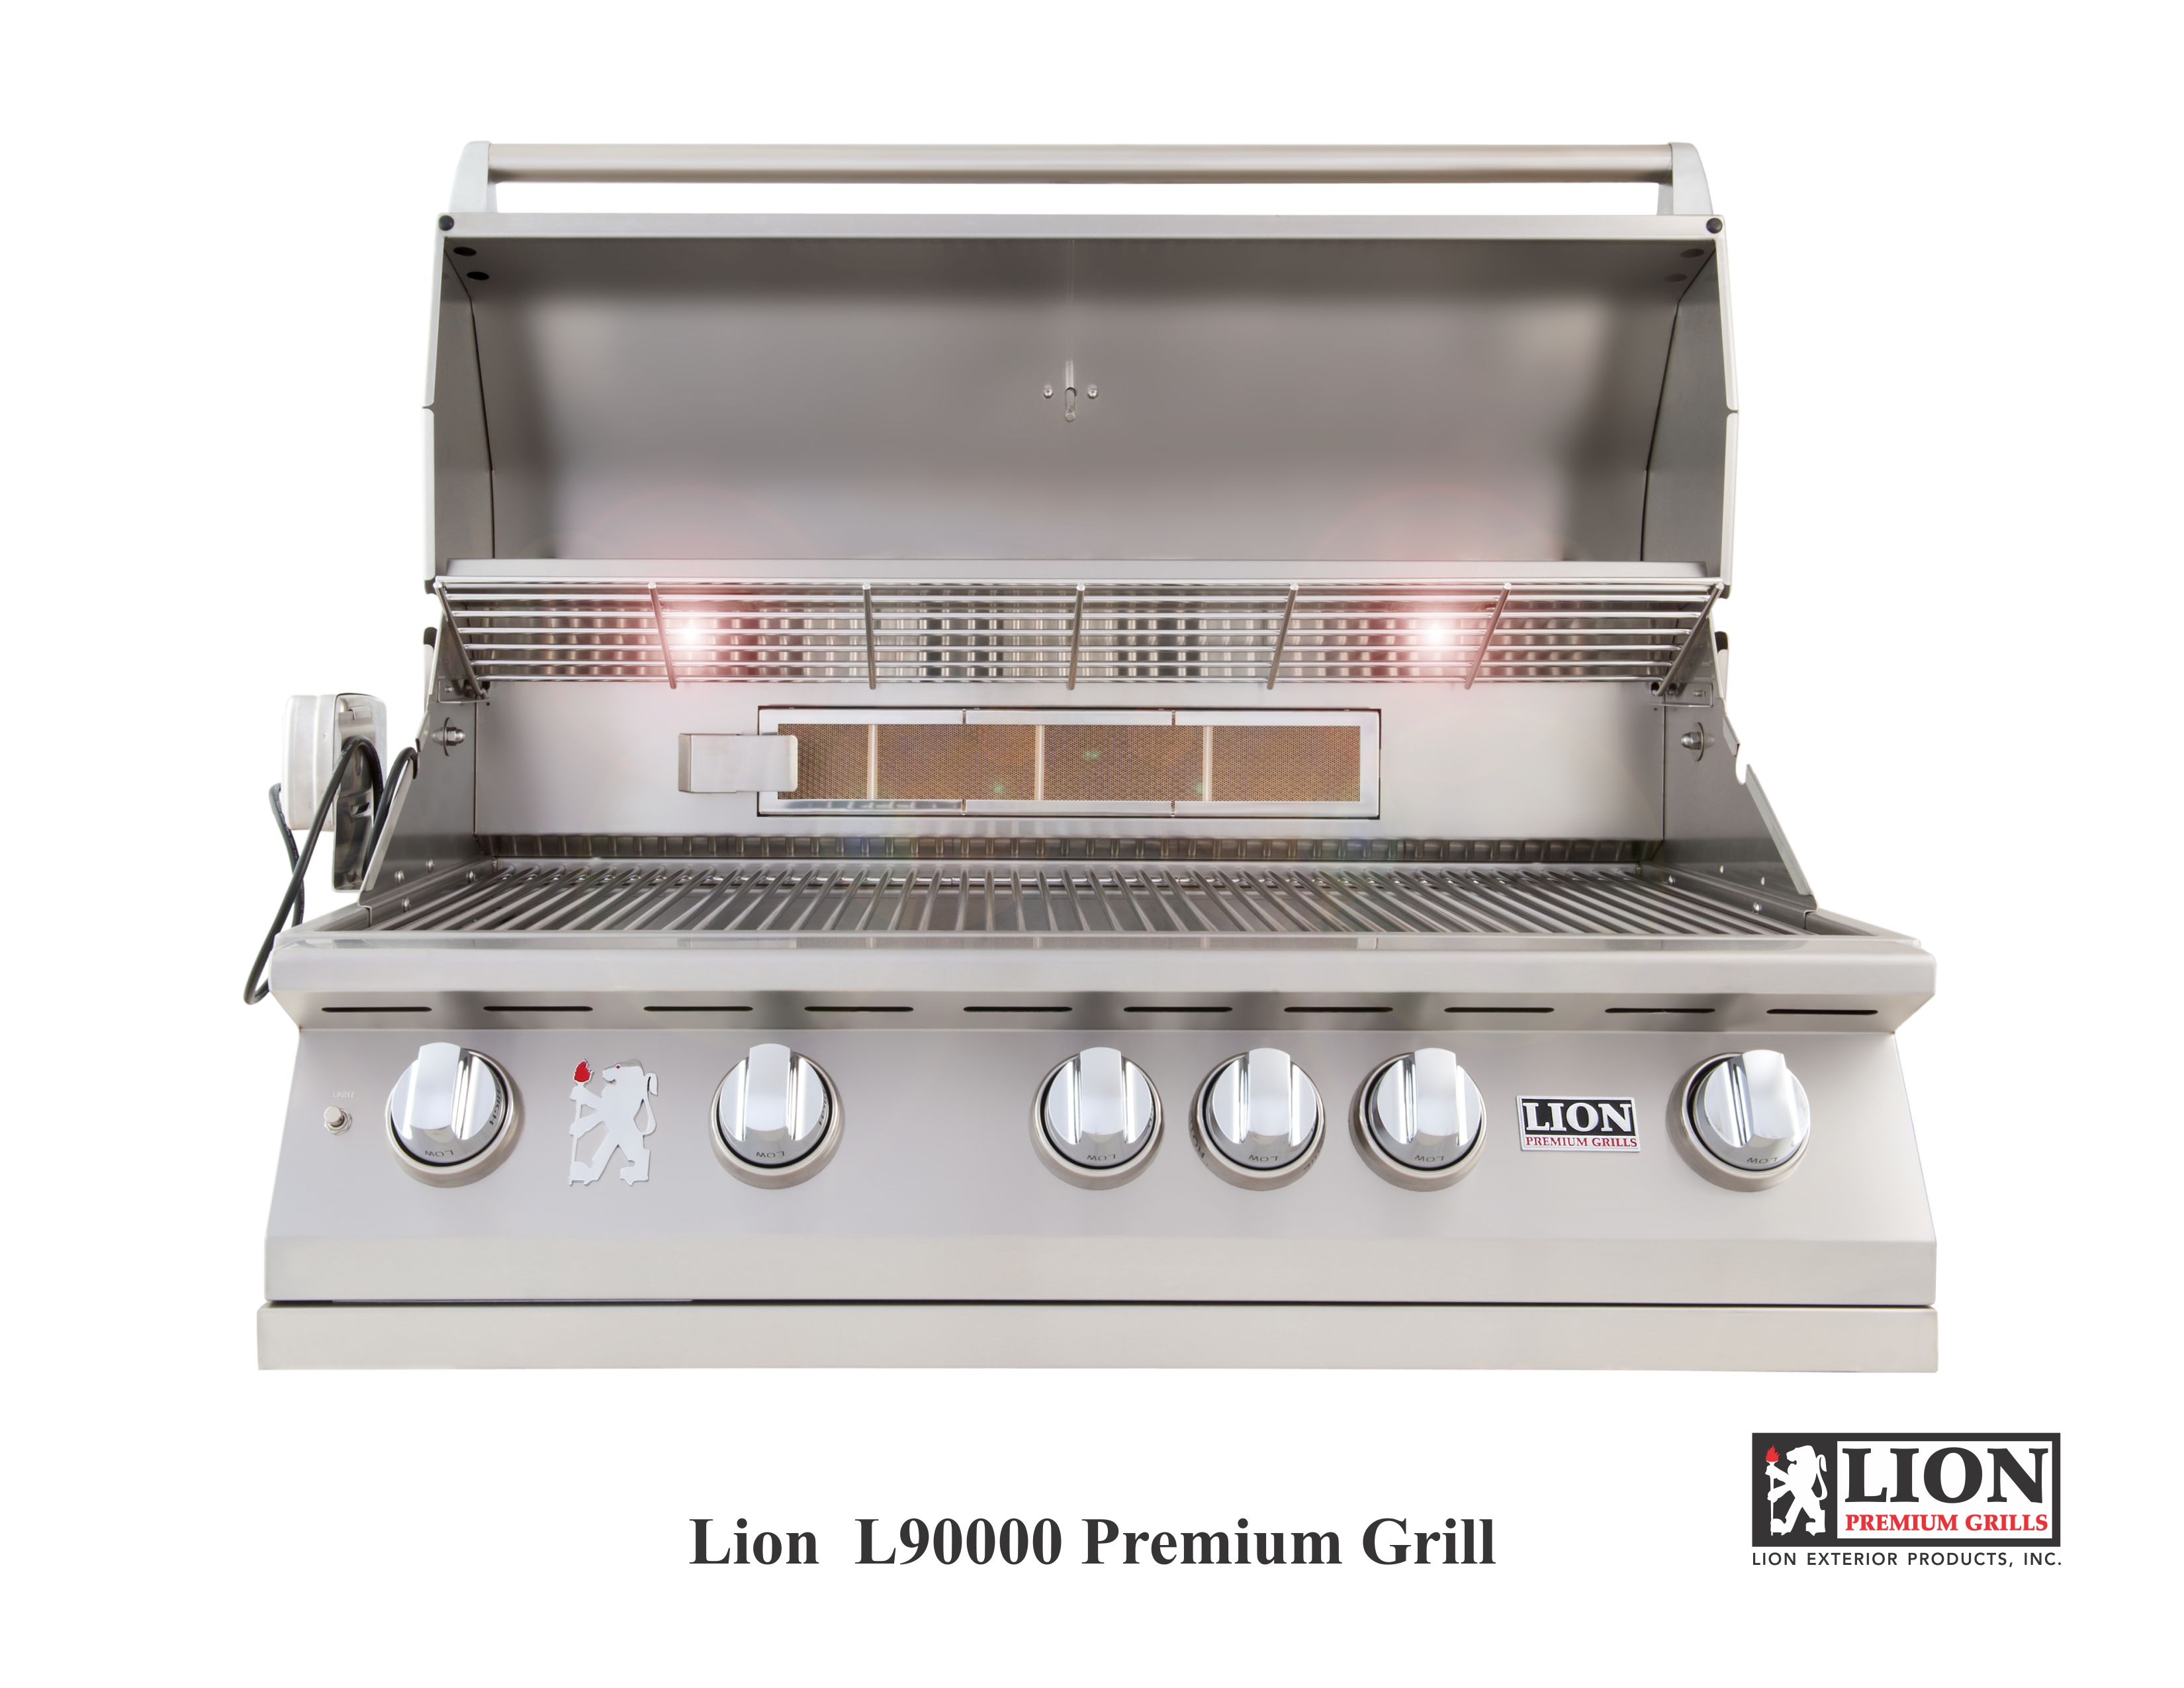 Geneeskunde crisis Agrarisch L90000 Grill – At 200.1 lbs it's the heaviest in its Class! – Lion Premium  Grills